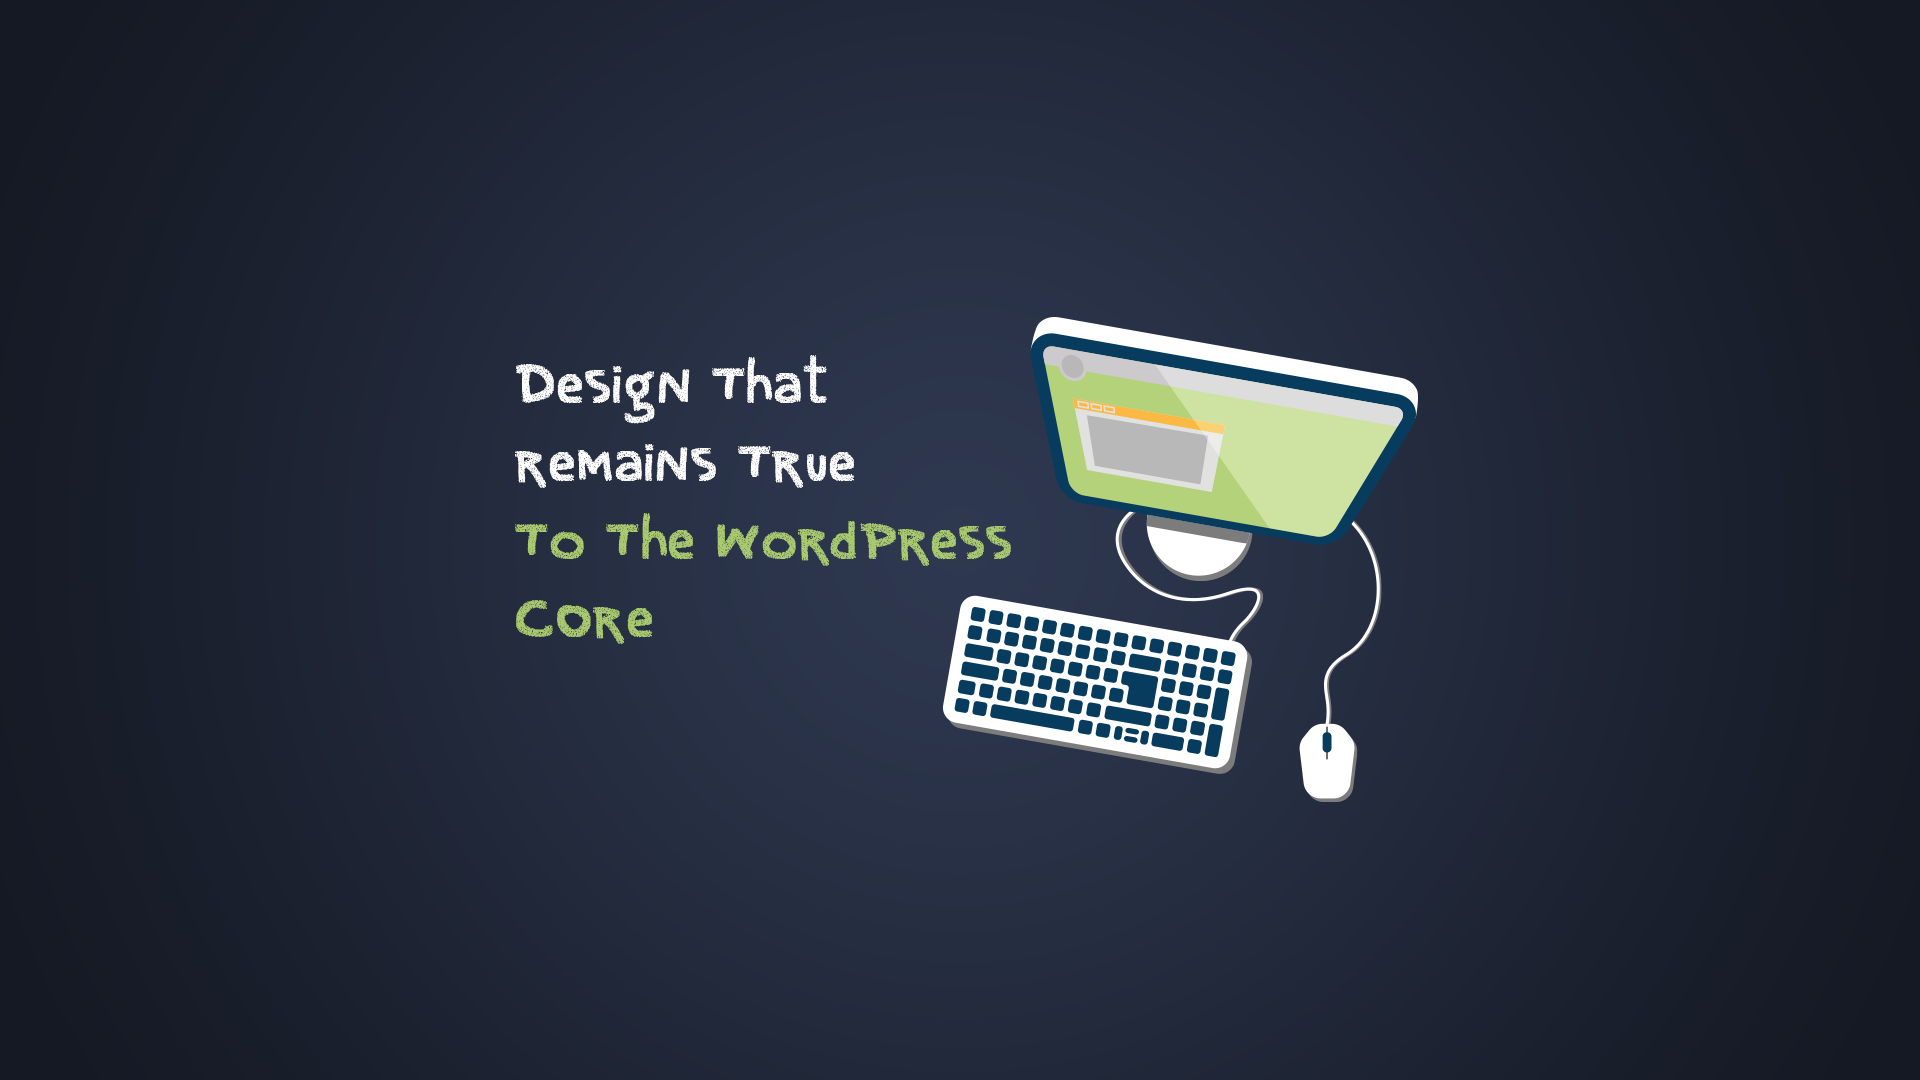 Design That Remains True To The WordPress Core